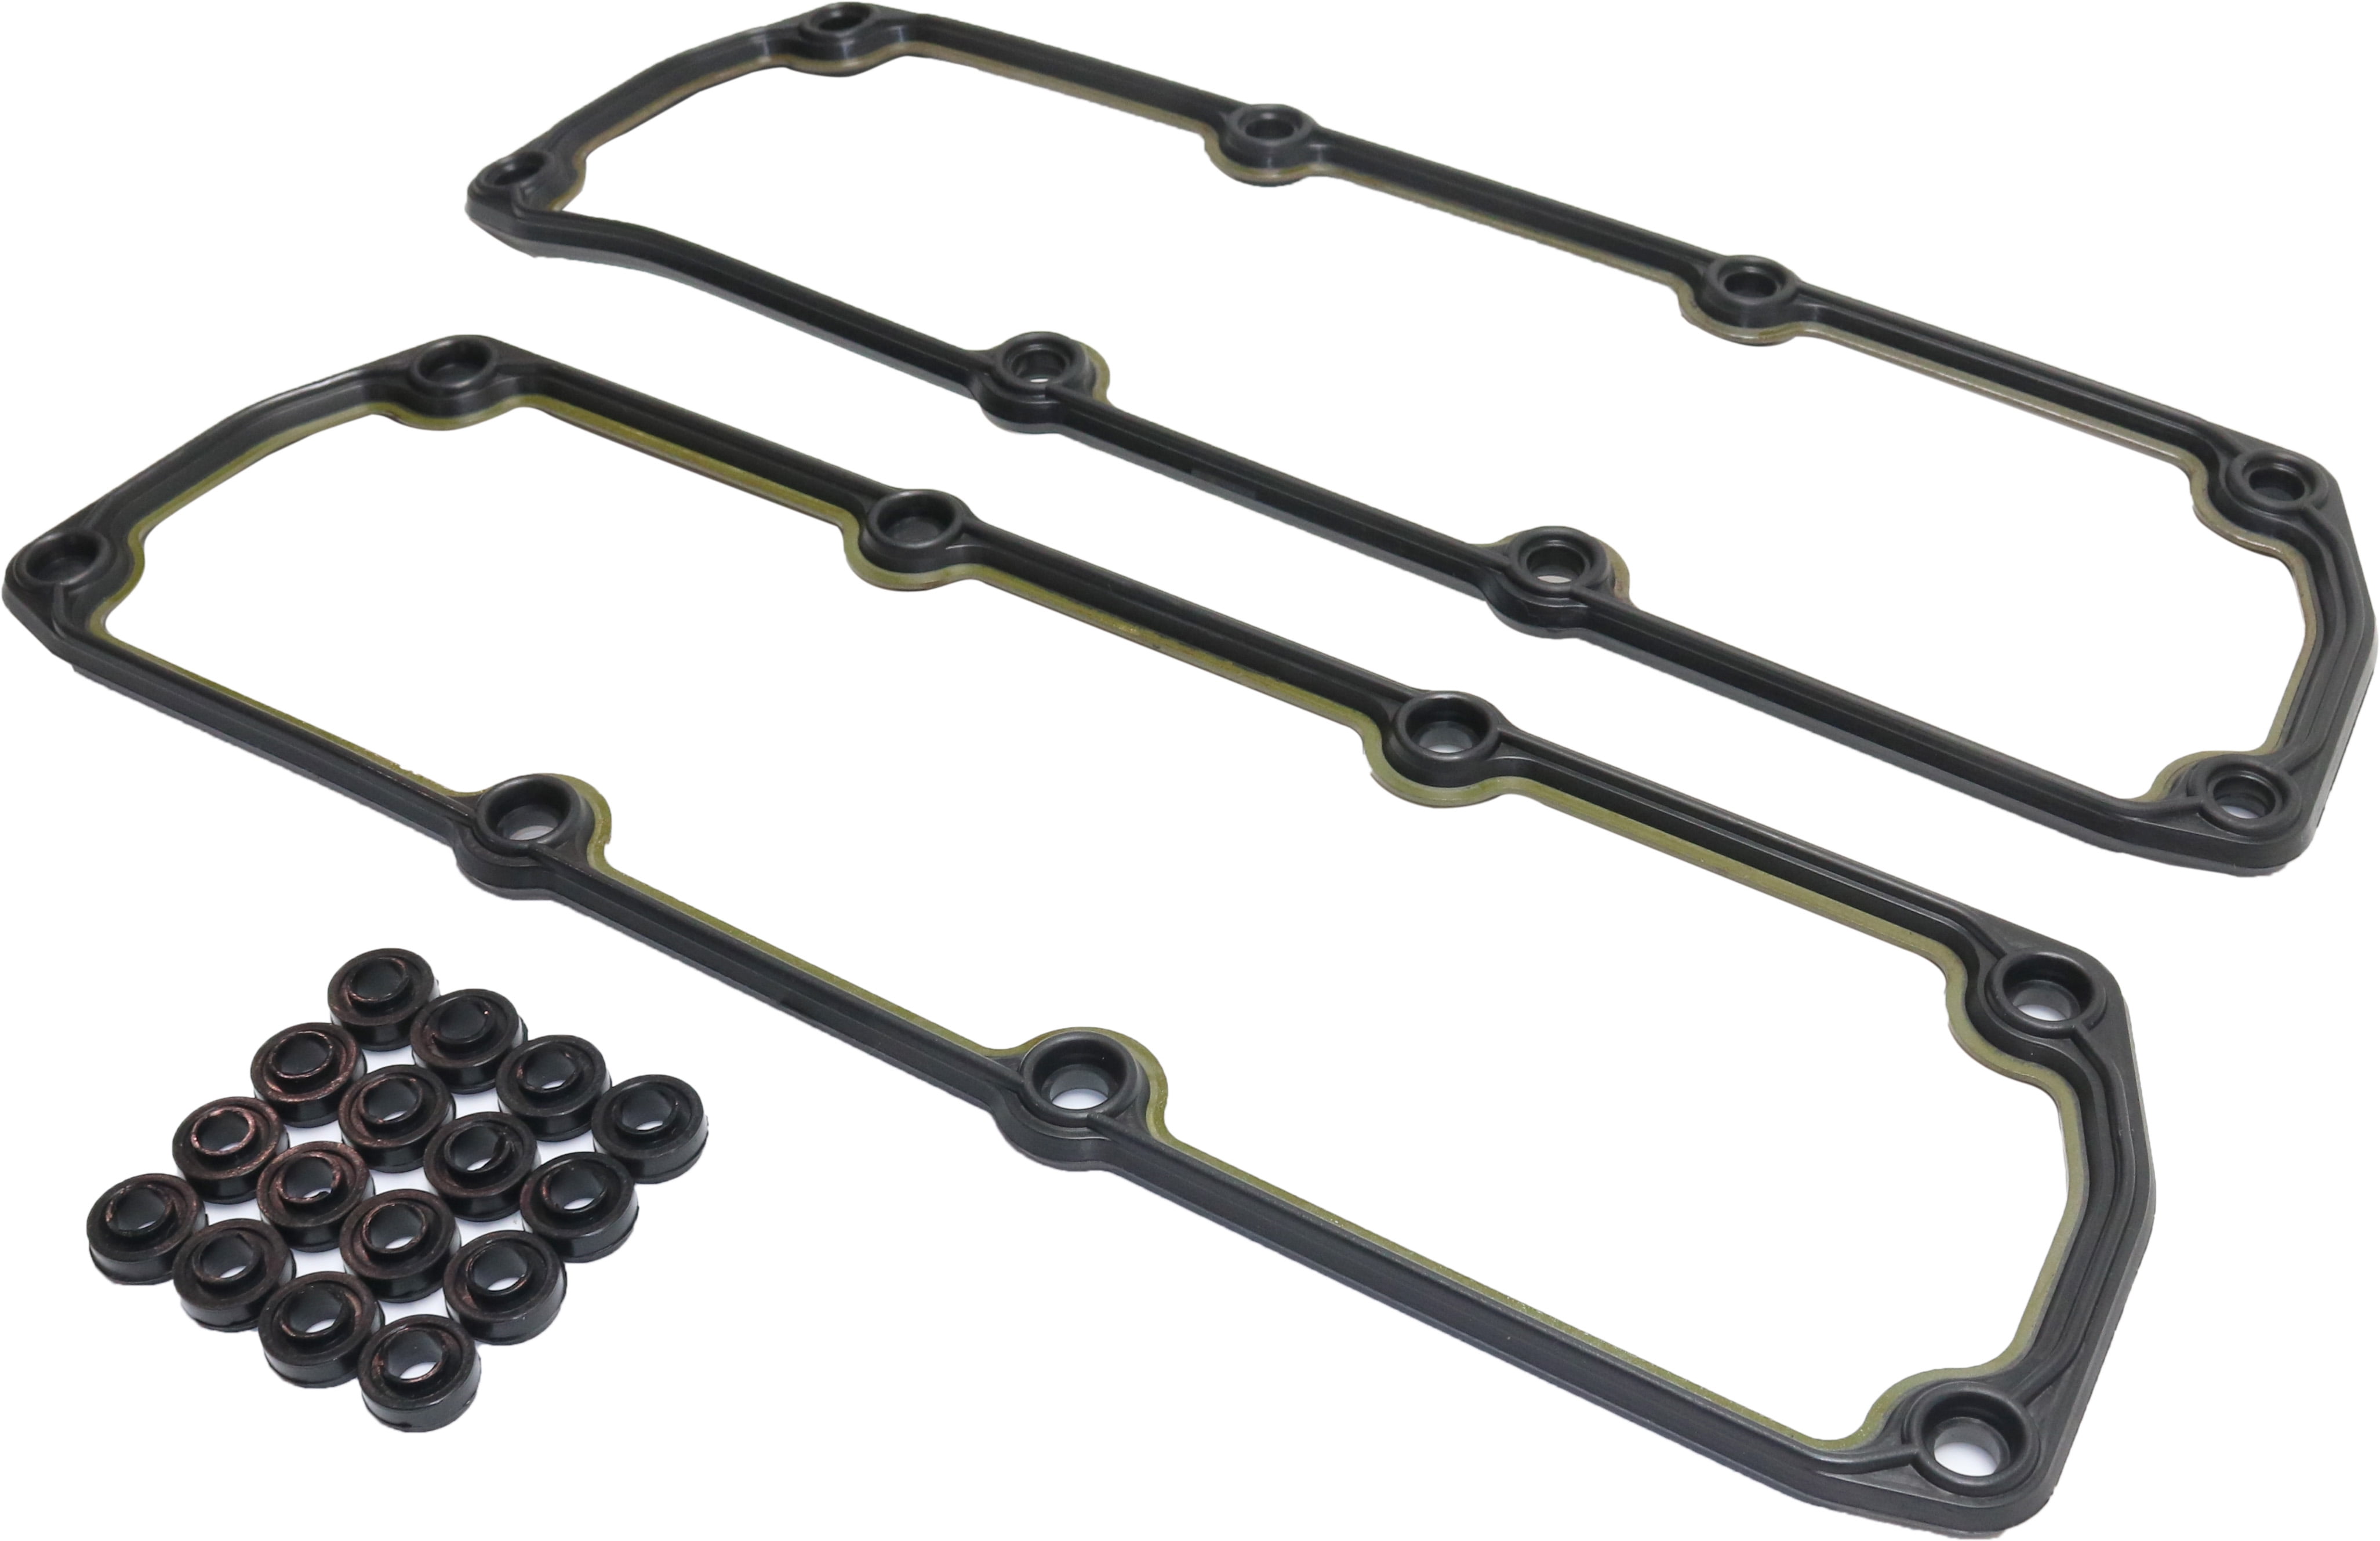 Valve Cover Gasket Compatible with 2001-2004 Dodge Grand Caravan Chrysler  Town and Country 6Cyl 3.3L 3.8L